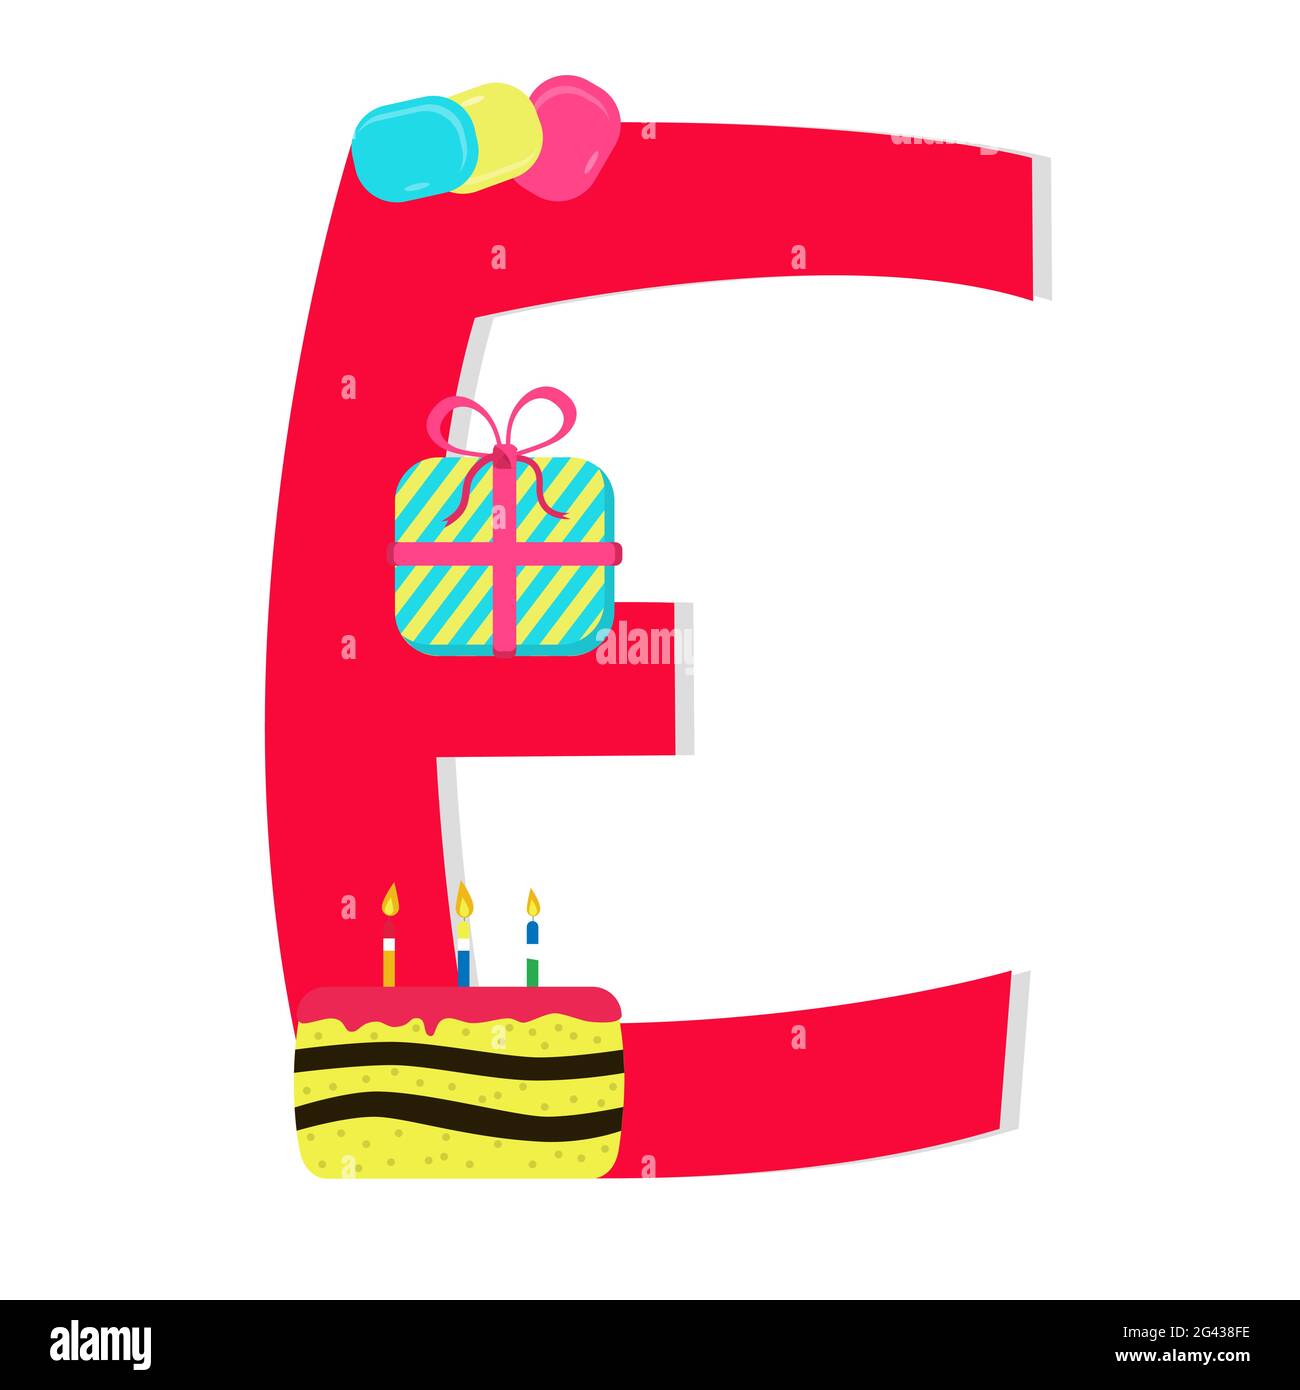 Letter "e" from stylized alphabet with candies: tablets candy, gift, bithday cake. White background. Stock Vector